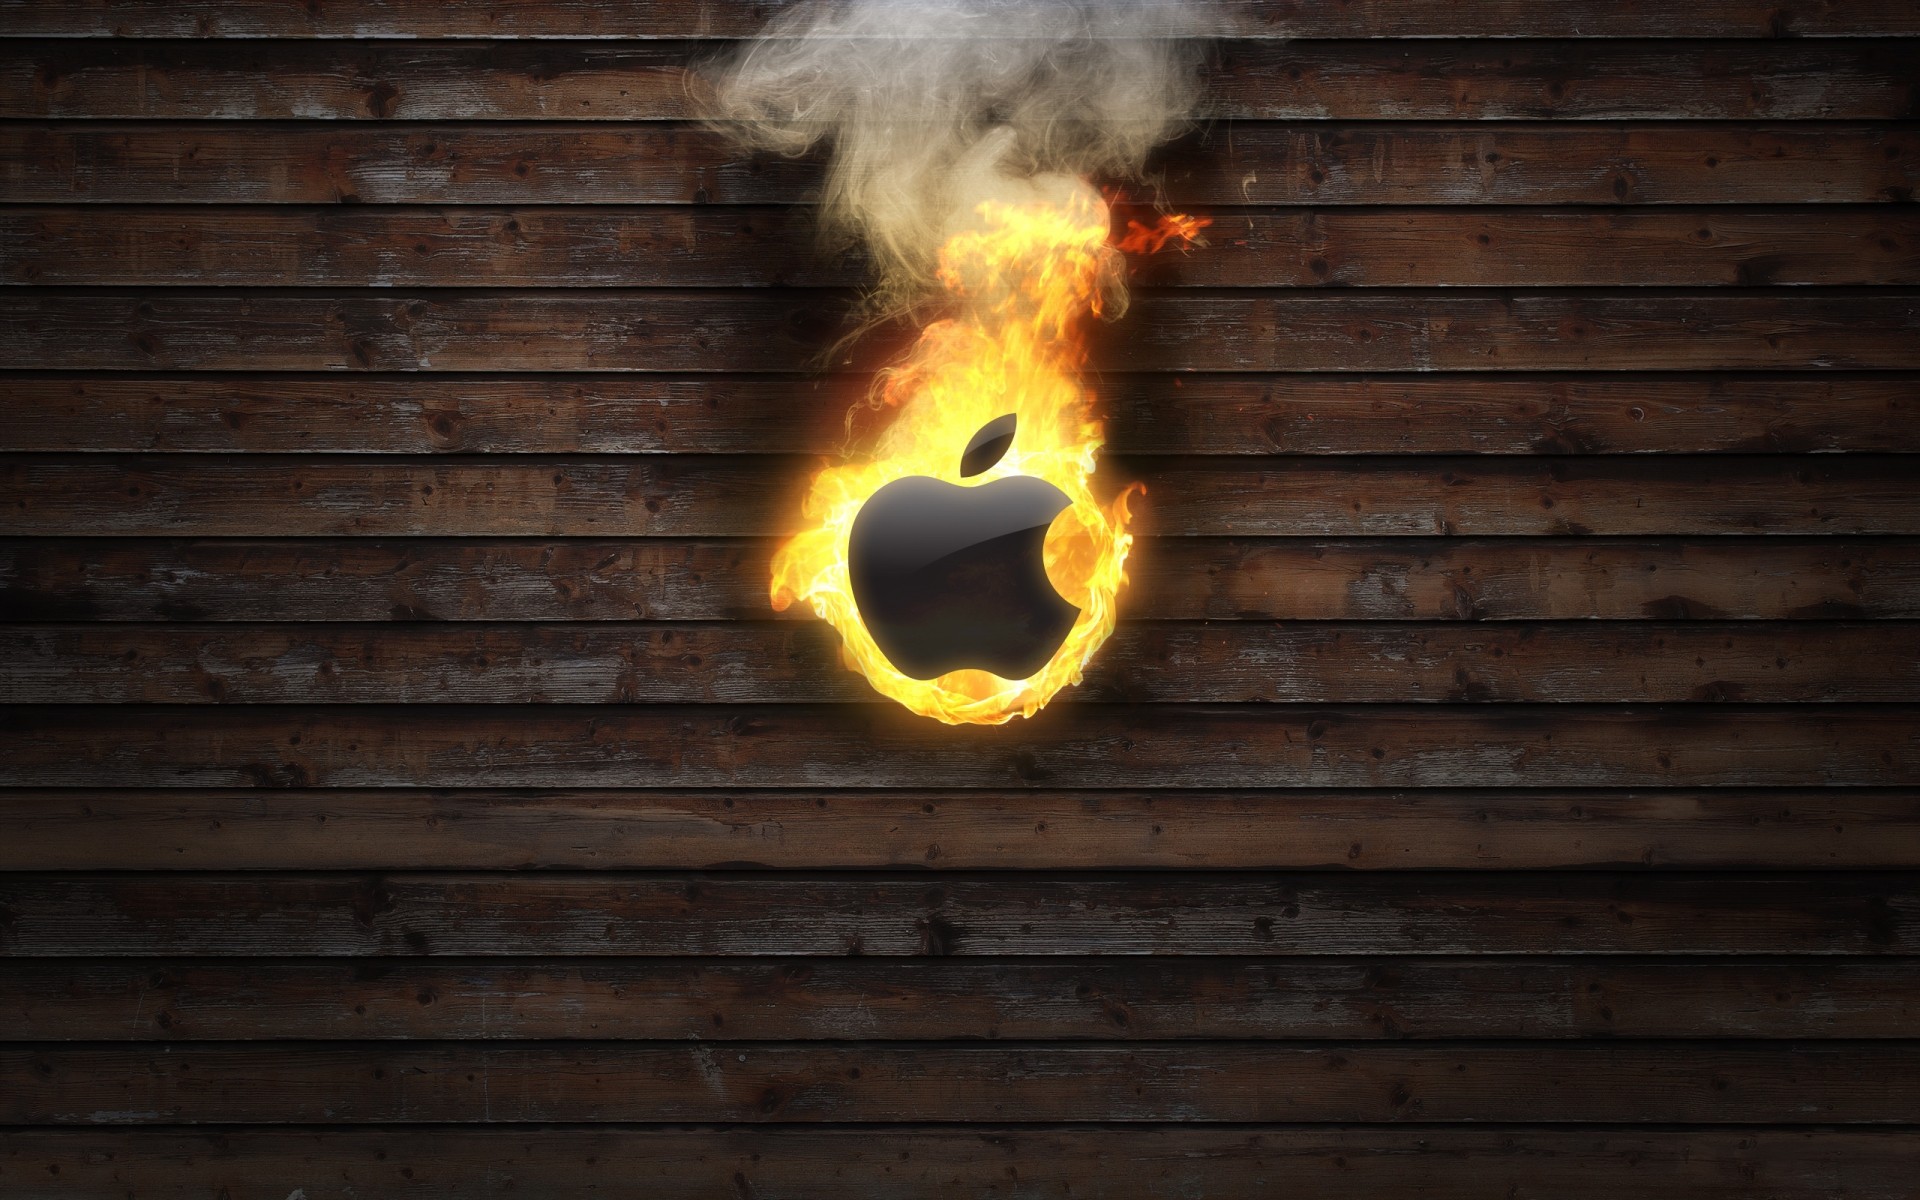 apple flame wood desktop wooden smoke hot heat old burn warmly abstract color logo background fire